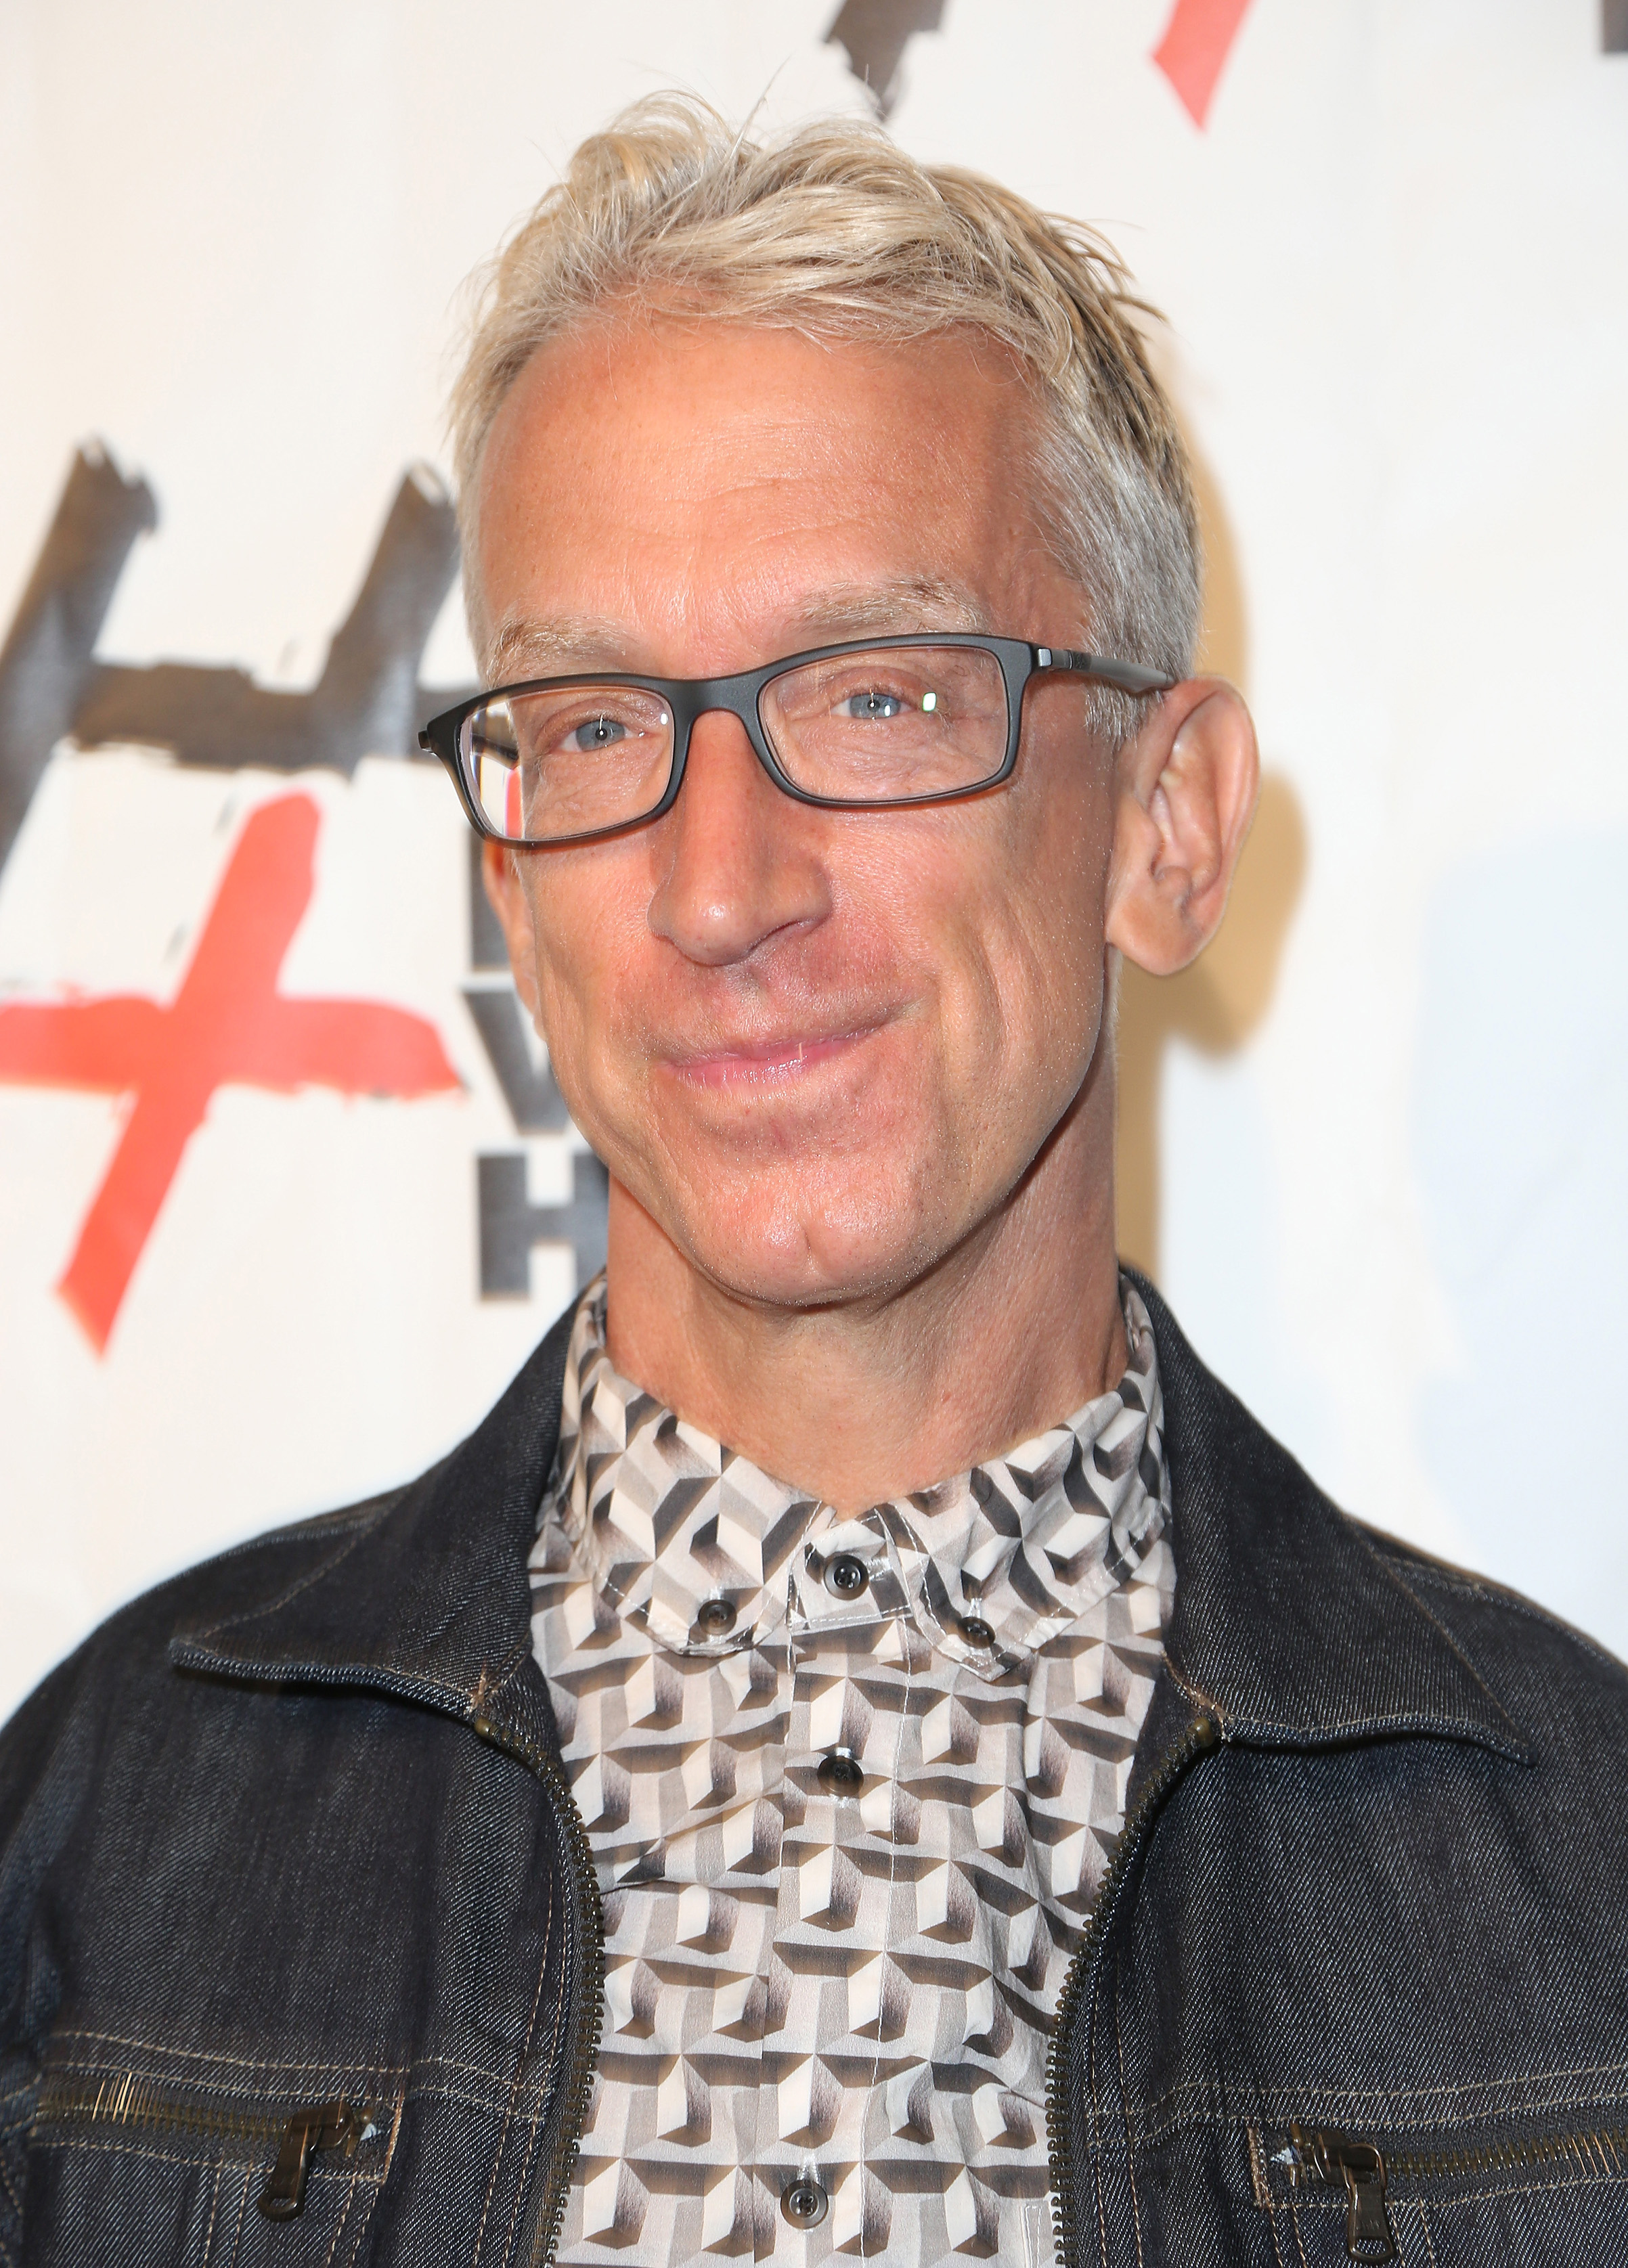 Comedian Andy Dick attends #NotWithHim Event in Los Angeles, on Aug. 19, 2016. (Maury Phillips—WireImage/Getty Images)